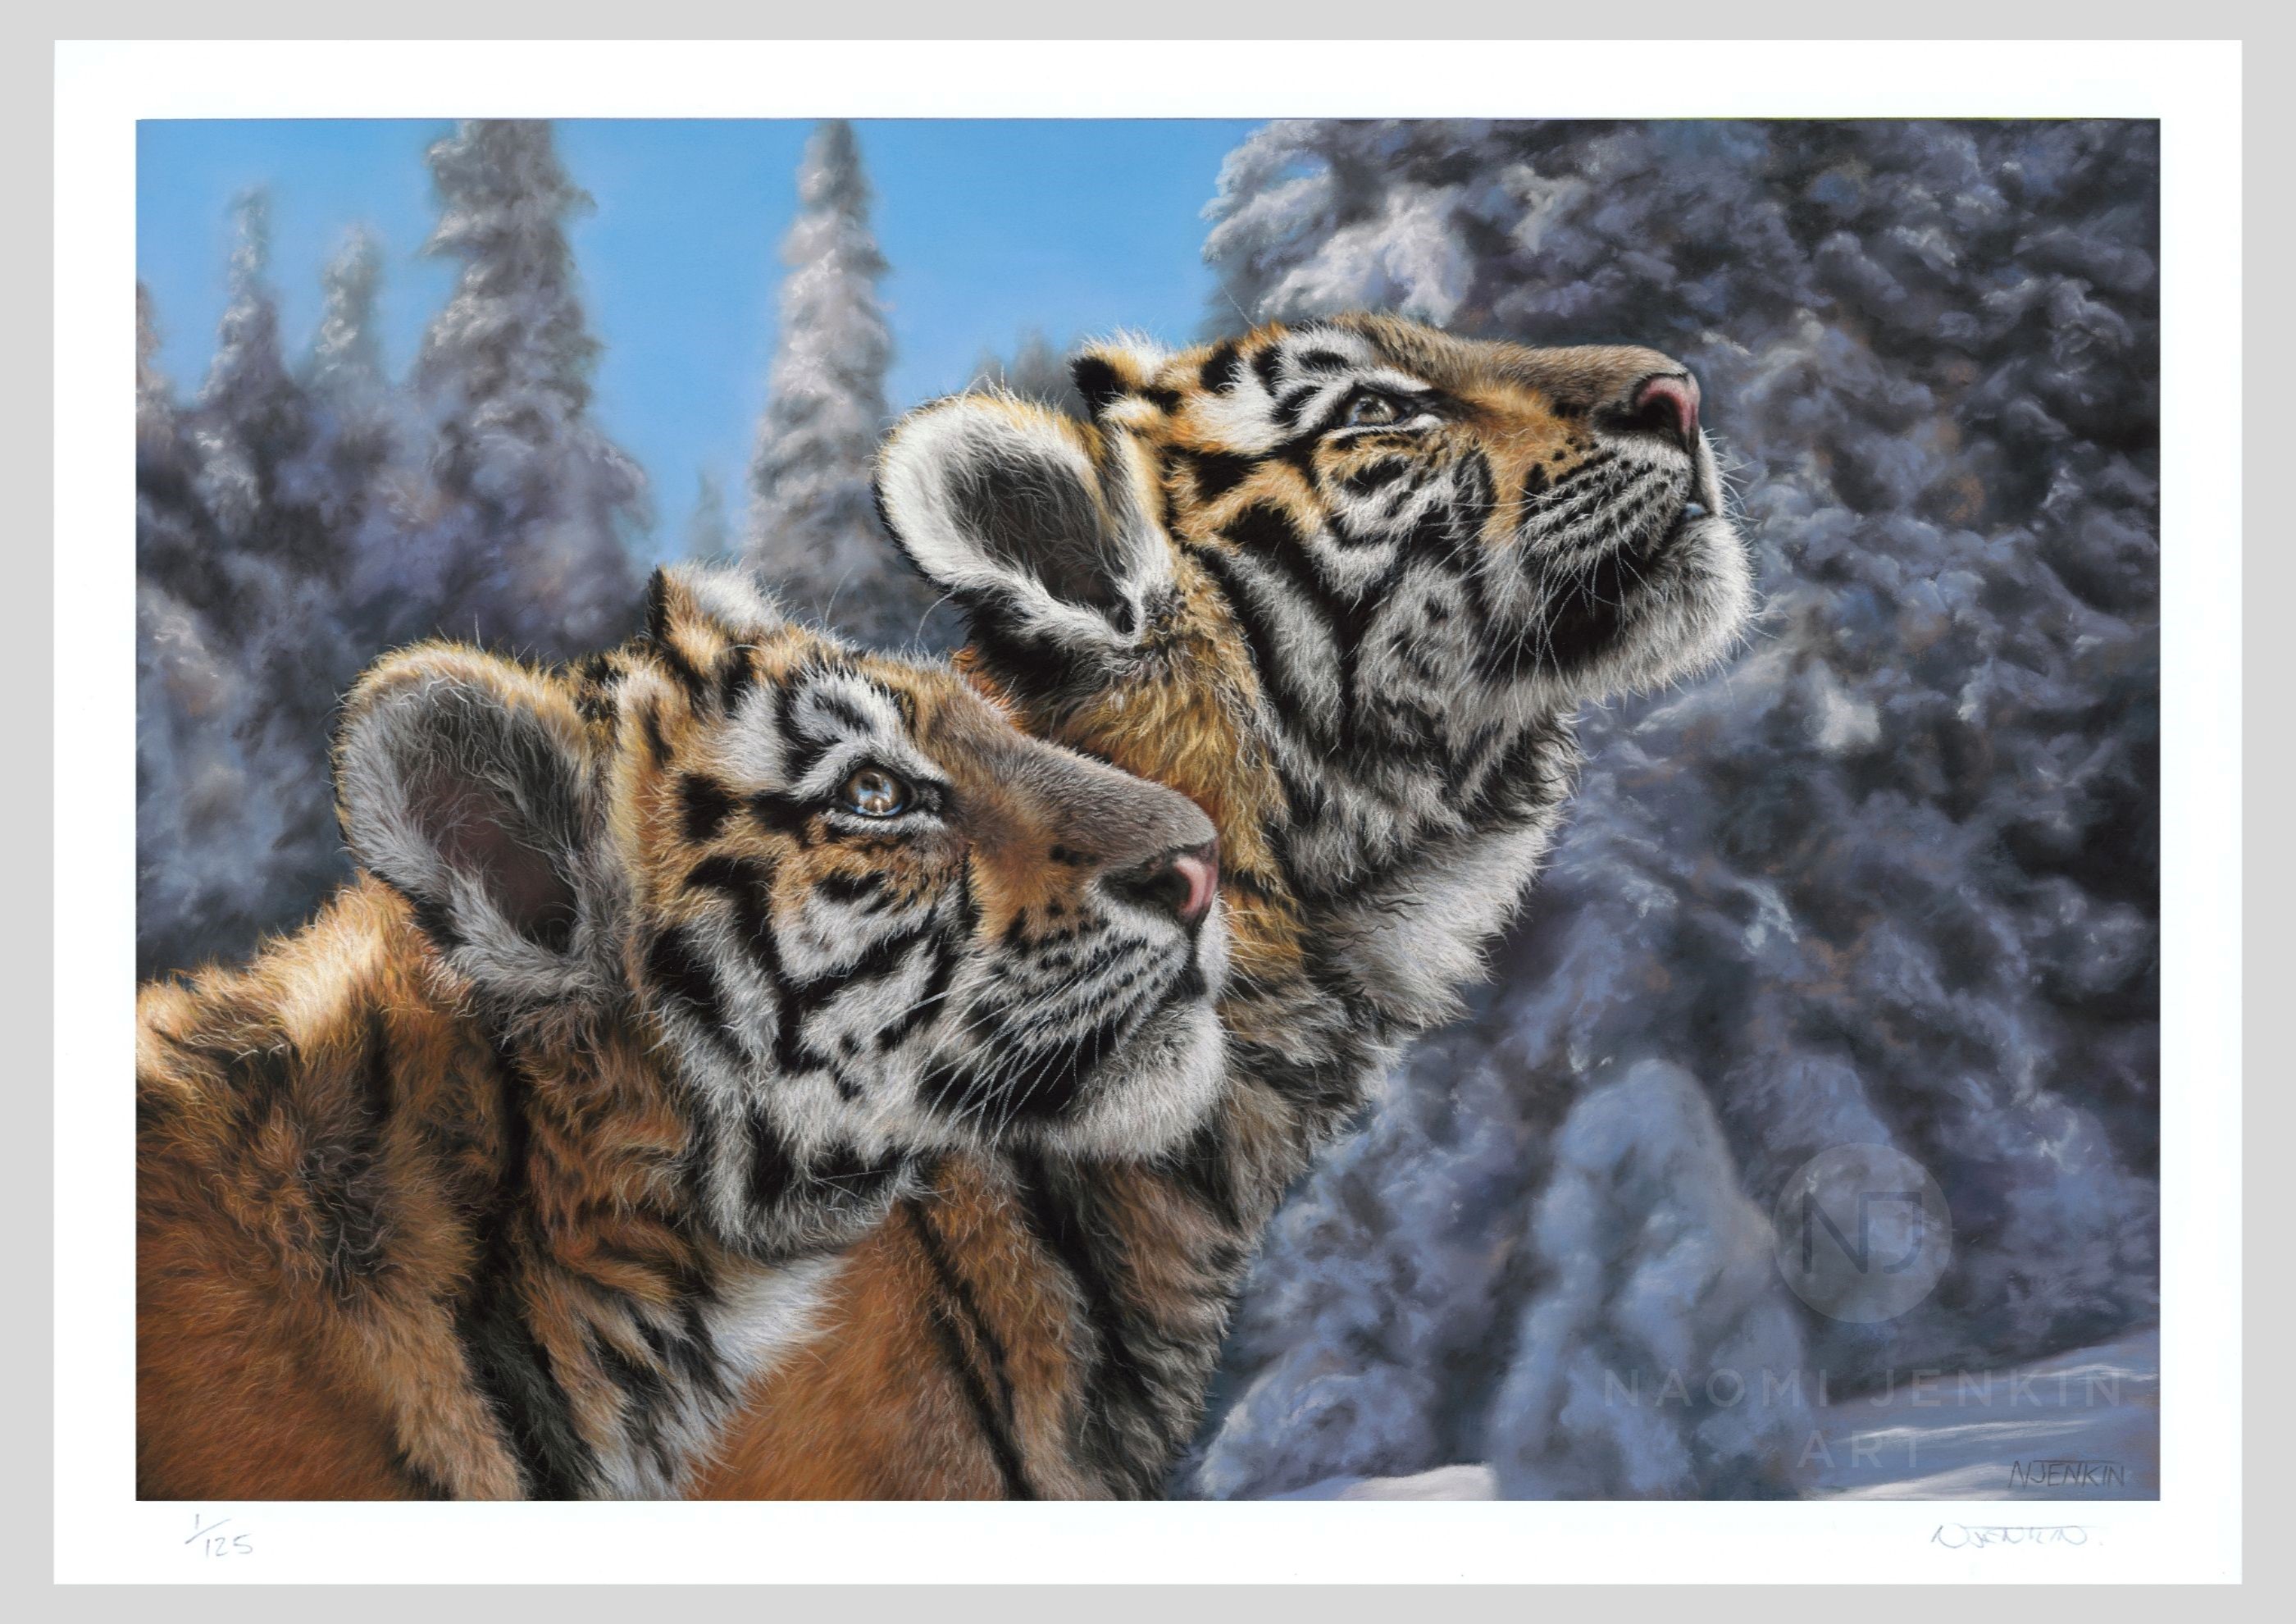 Tiger art by Naomi Jenkin Art. Limited edition fine art print of two Amur tiger cubs. 